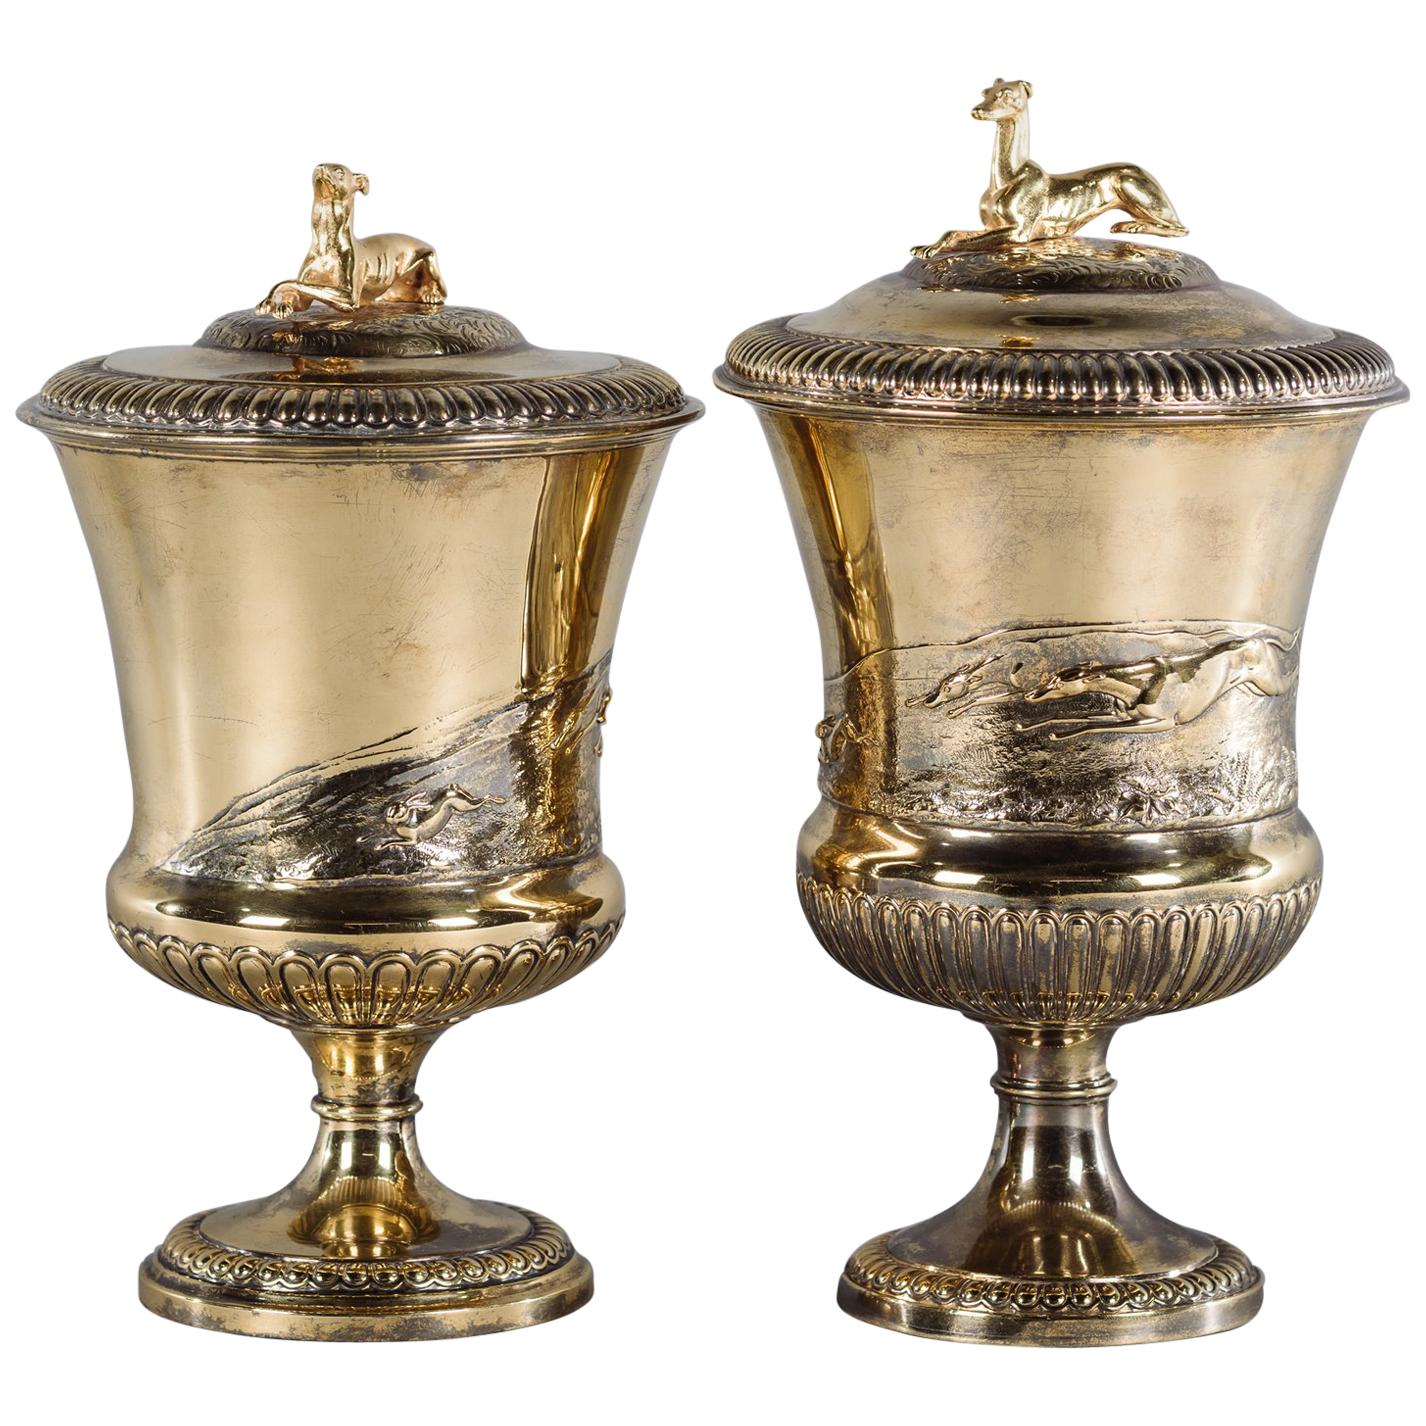 Pair of Cup and Covers by John Bridge for Rundell, Bridge & Rundell, circa 1825